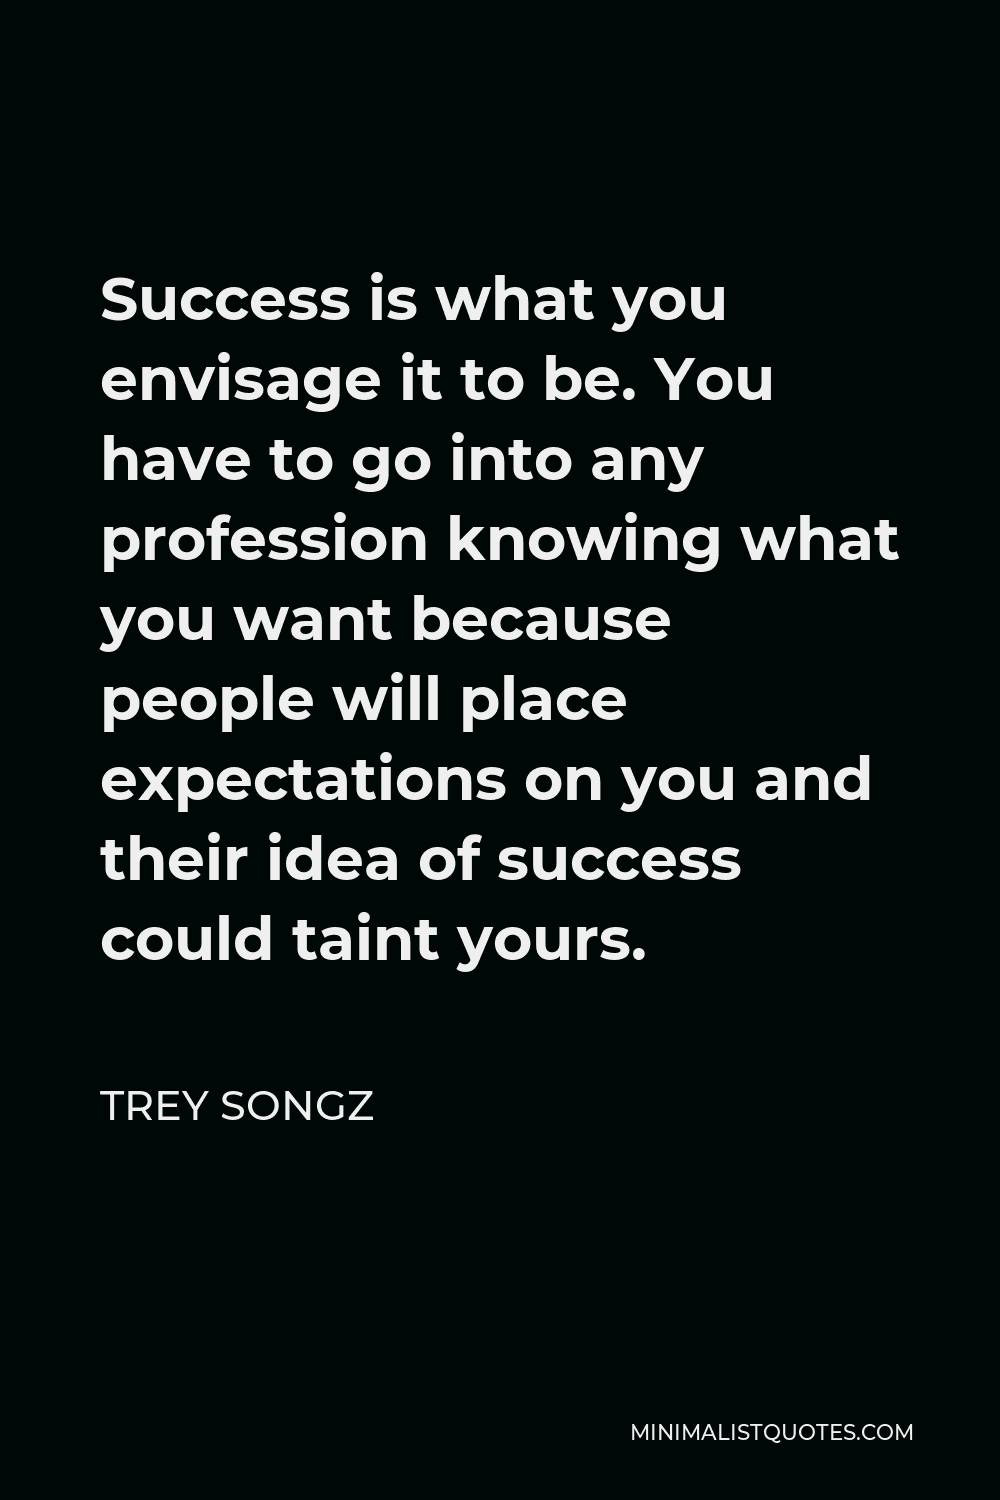 Trey Songz Quote - Success is what you envisage it to be. You have to go into any profession knowing what you want because people will place expectations on you and their idea of success could taint yours.